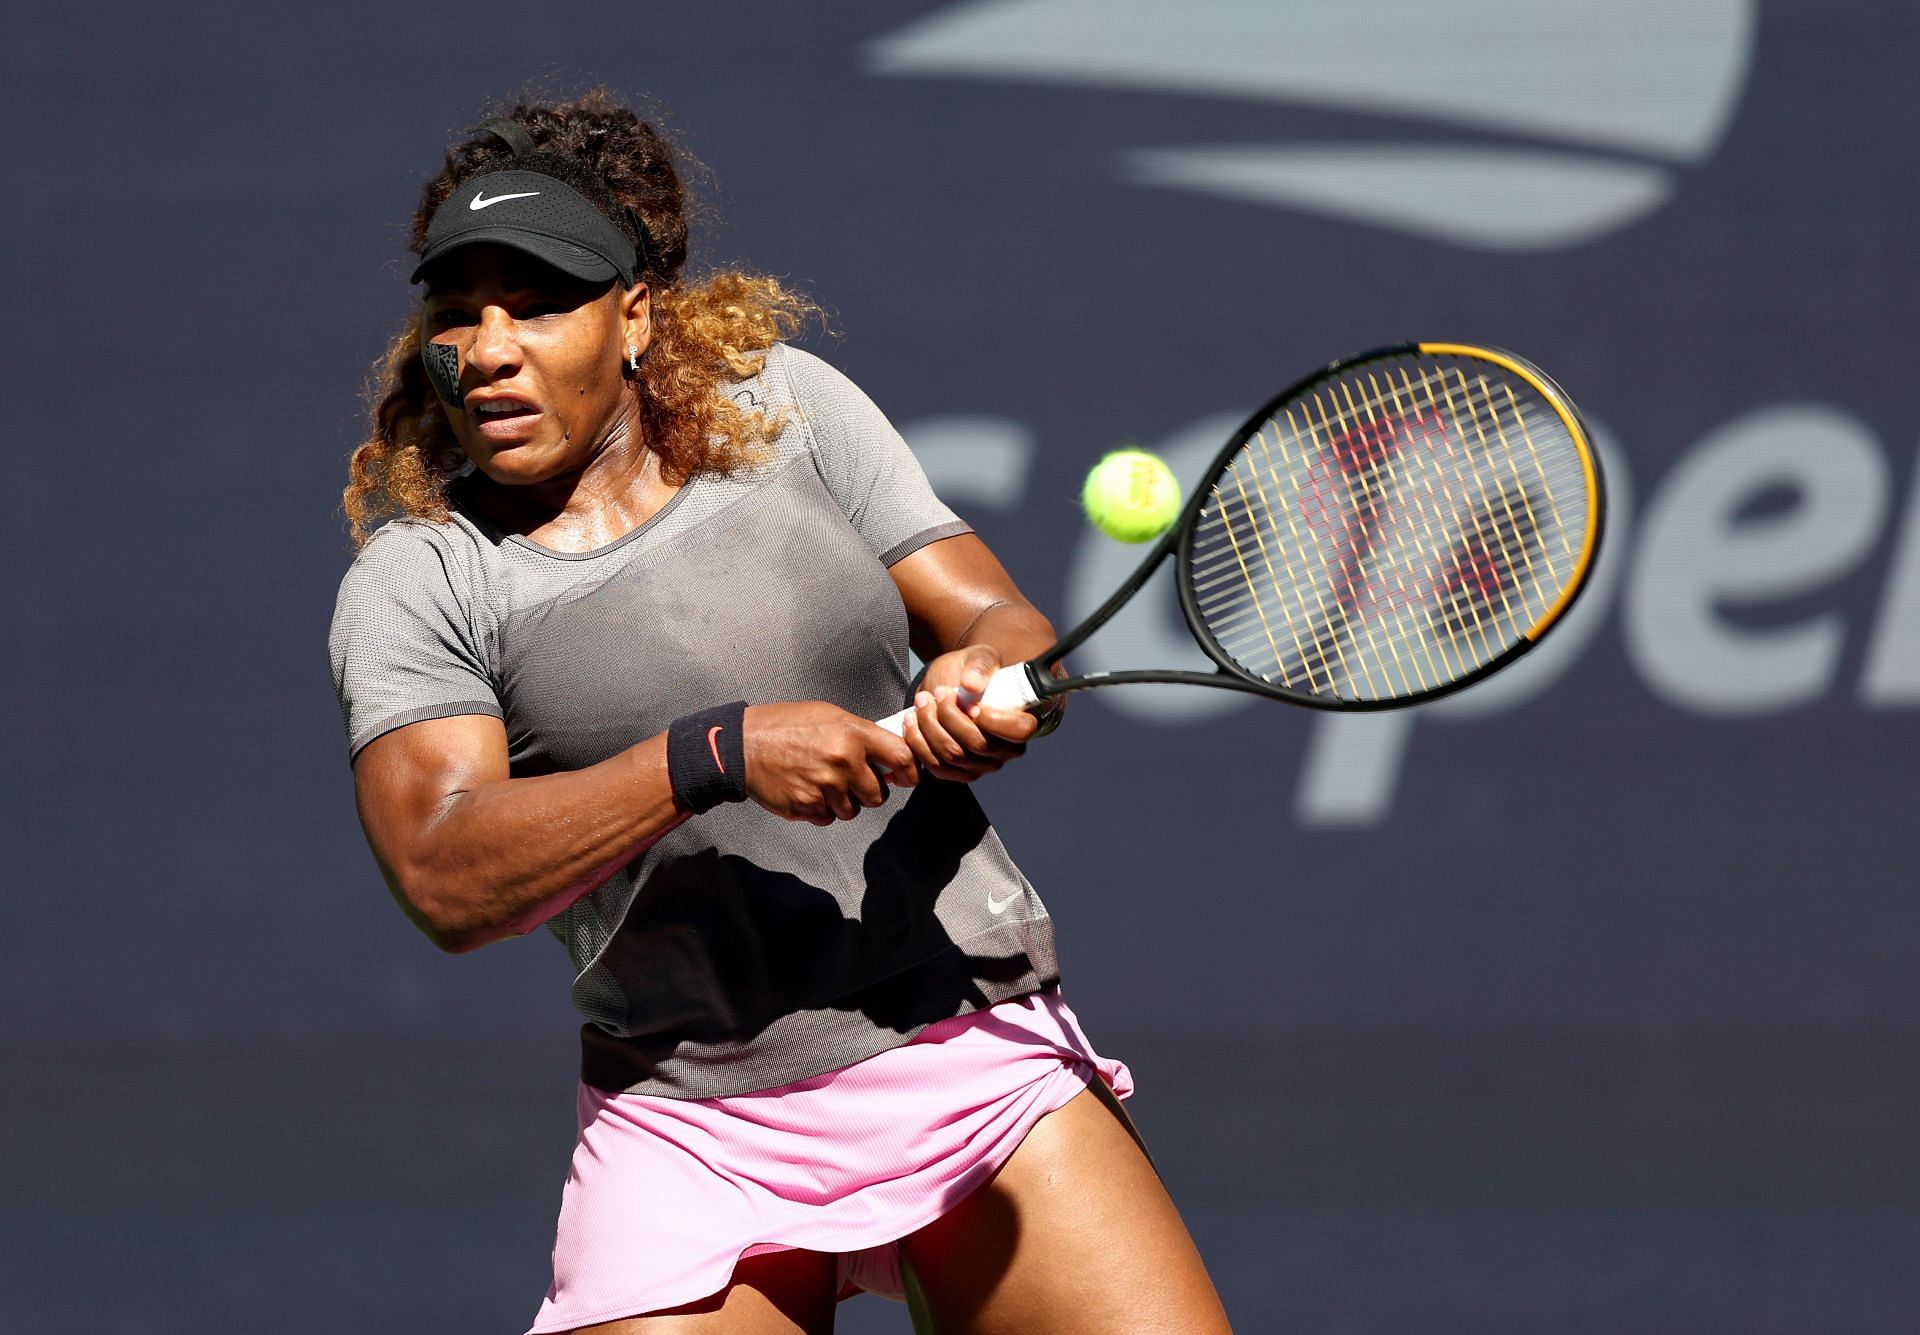 Serena Williams is set to retire from the sport soon.